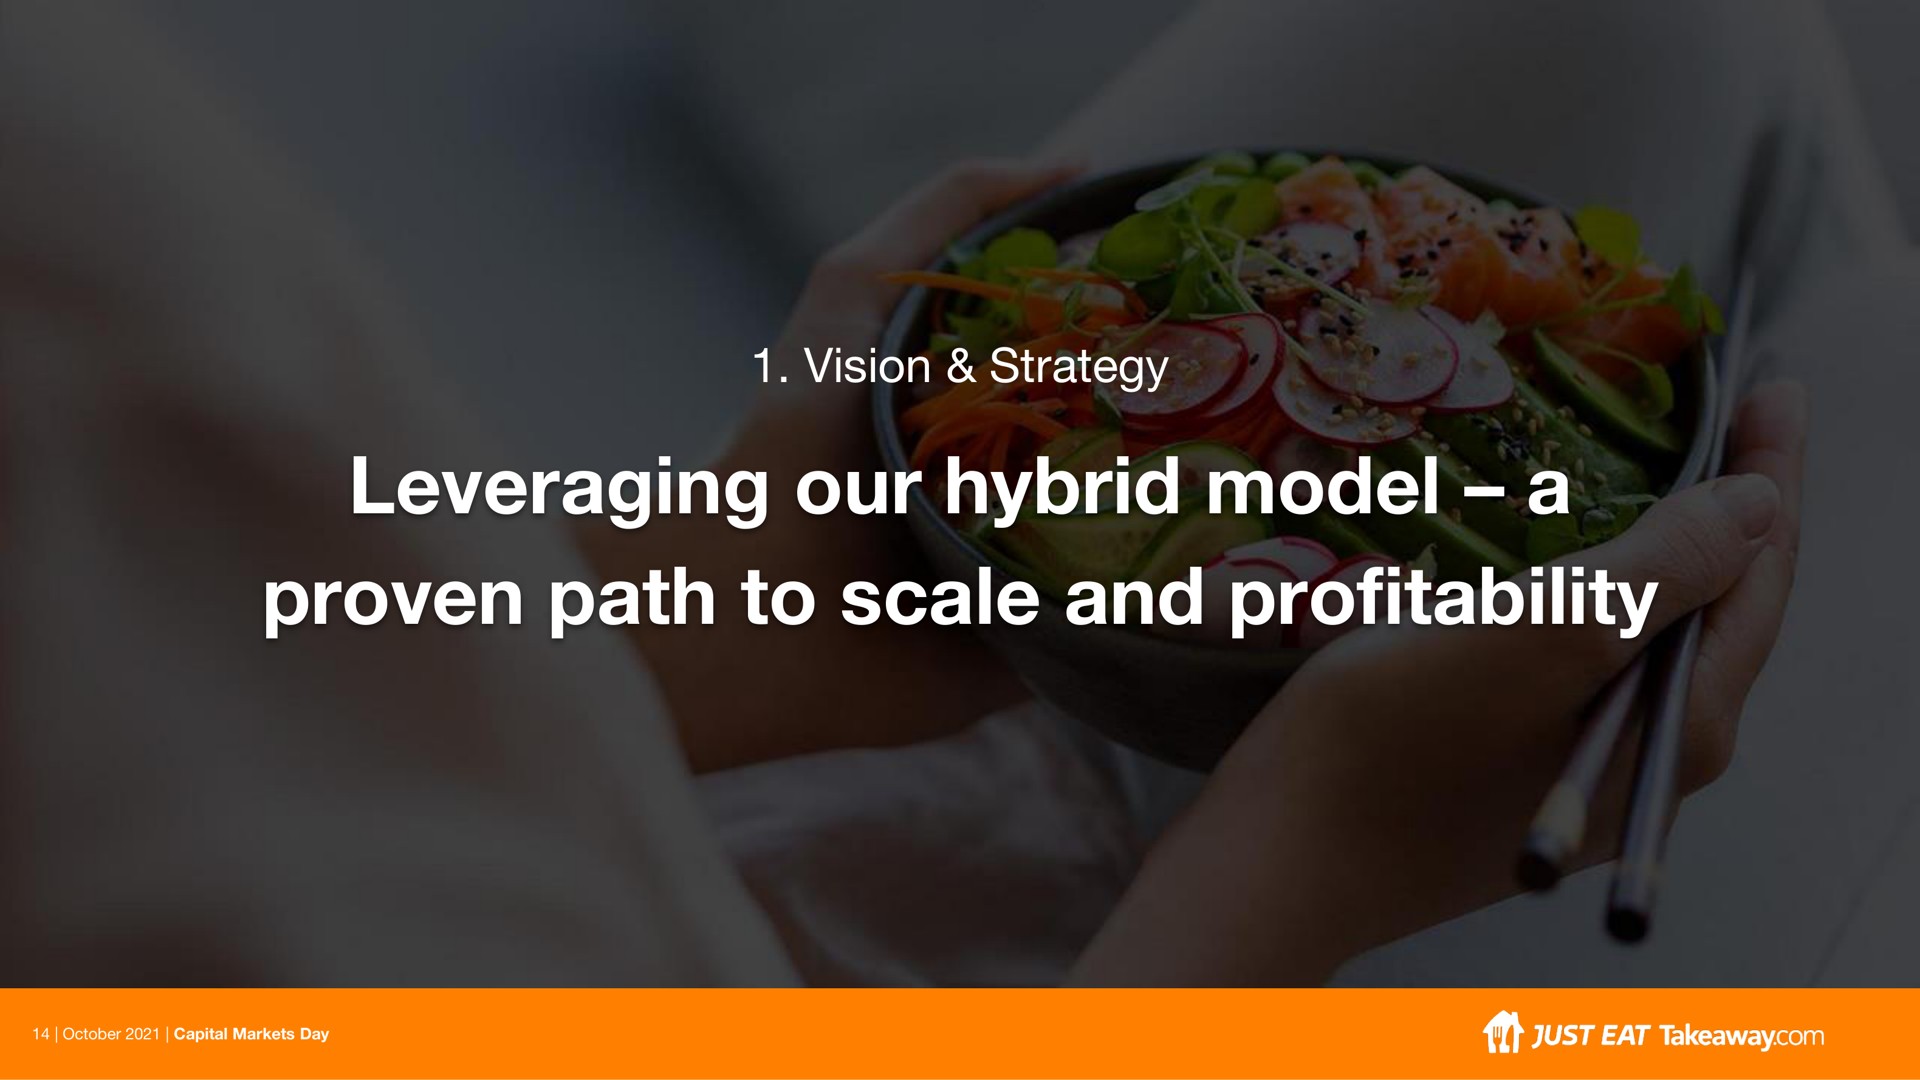 vision strategy leveraging our hybrid model a proven path to scale and profitability | Just Eat Takeaway.com